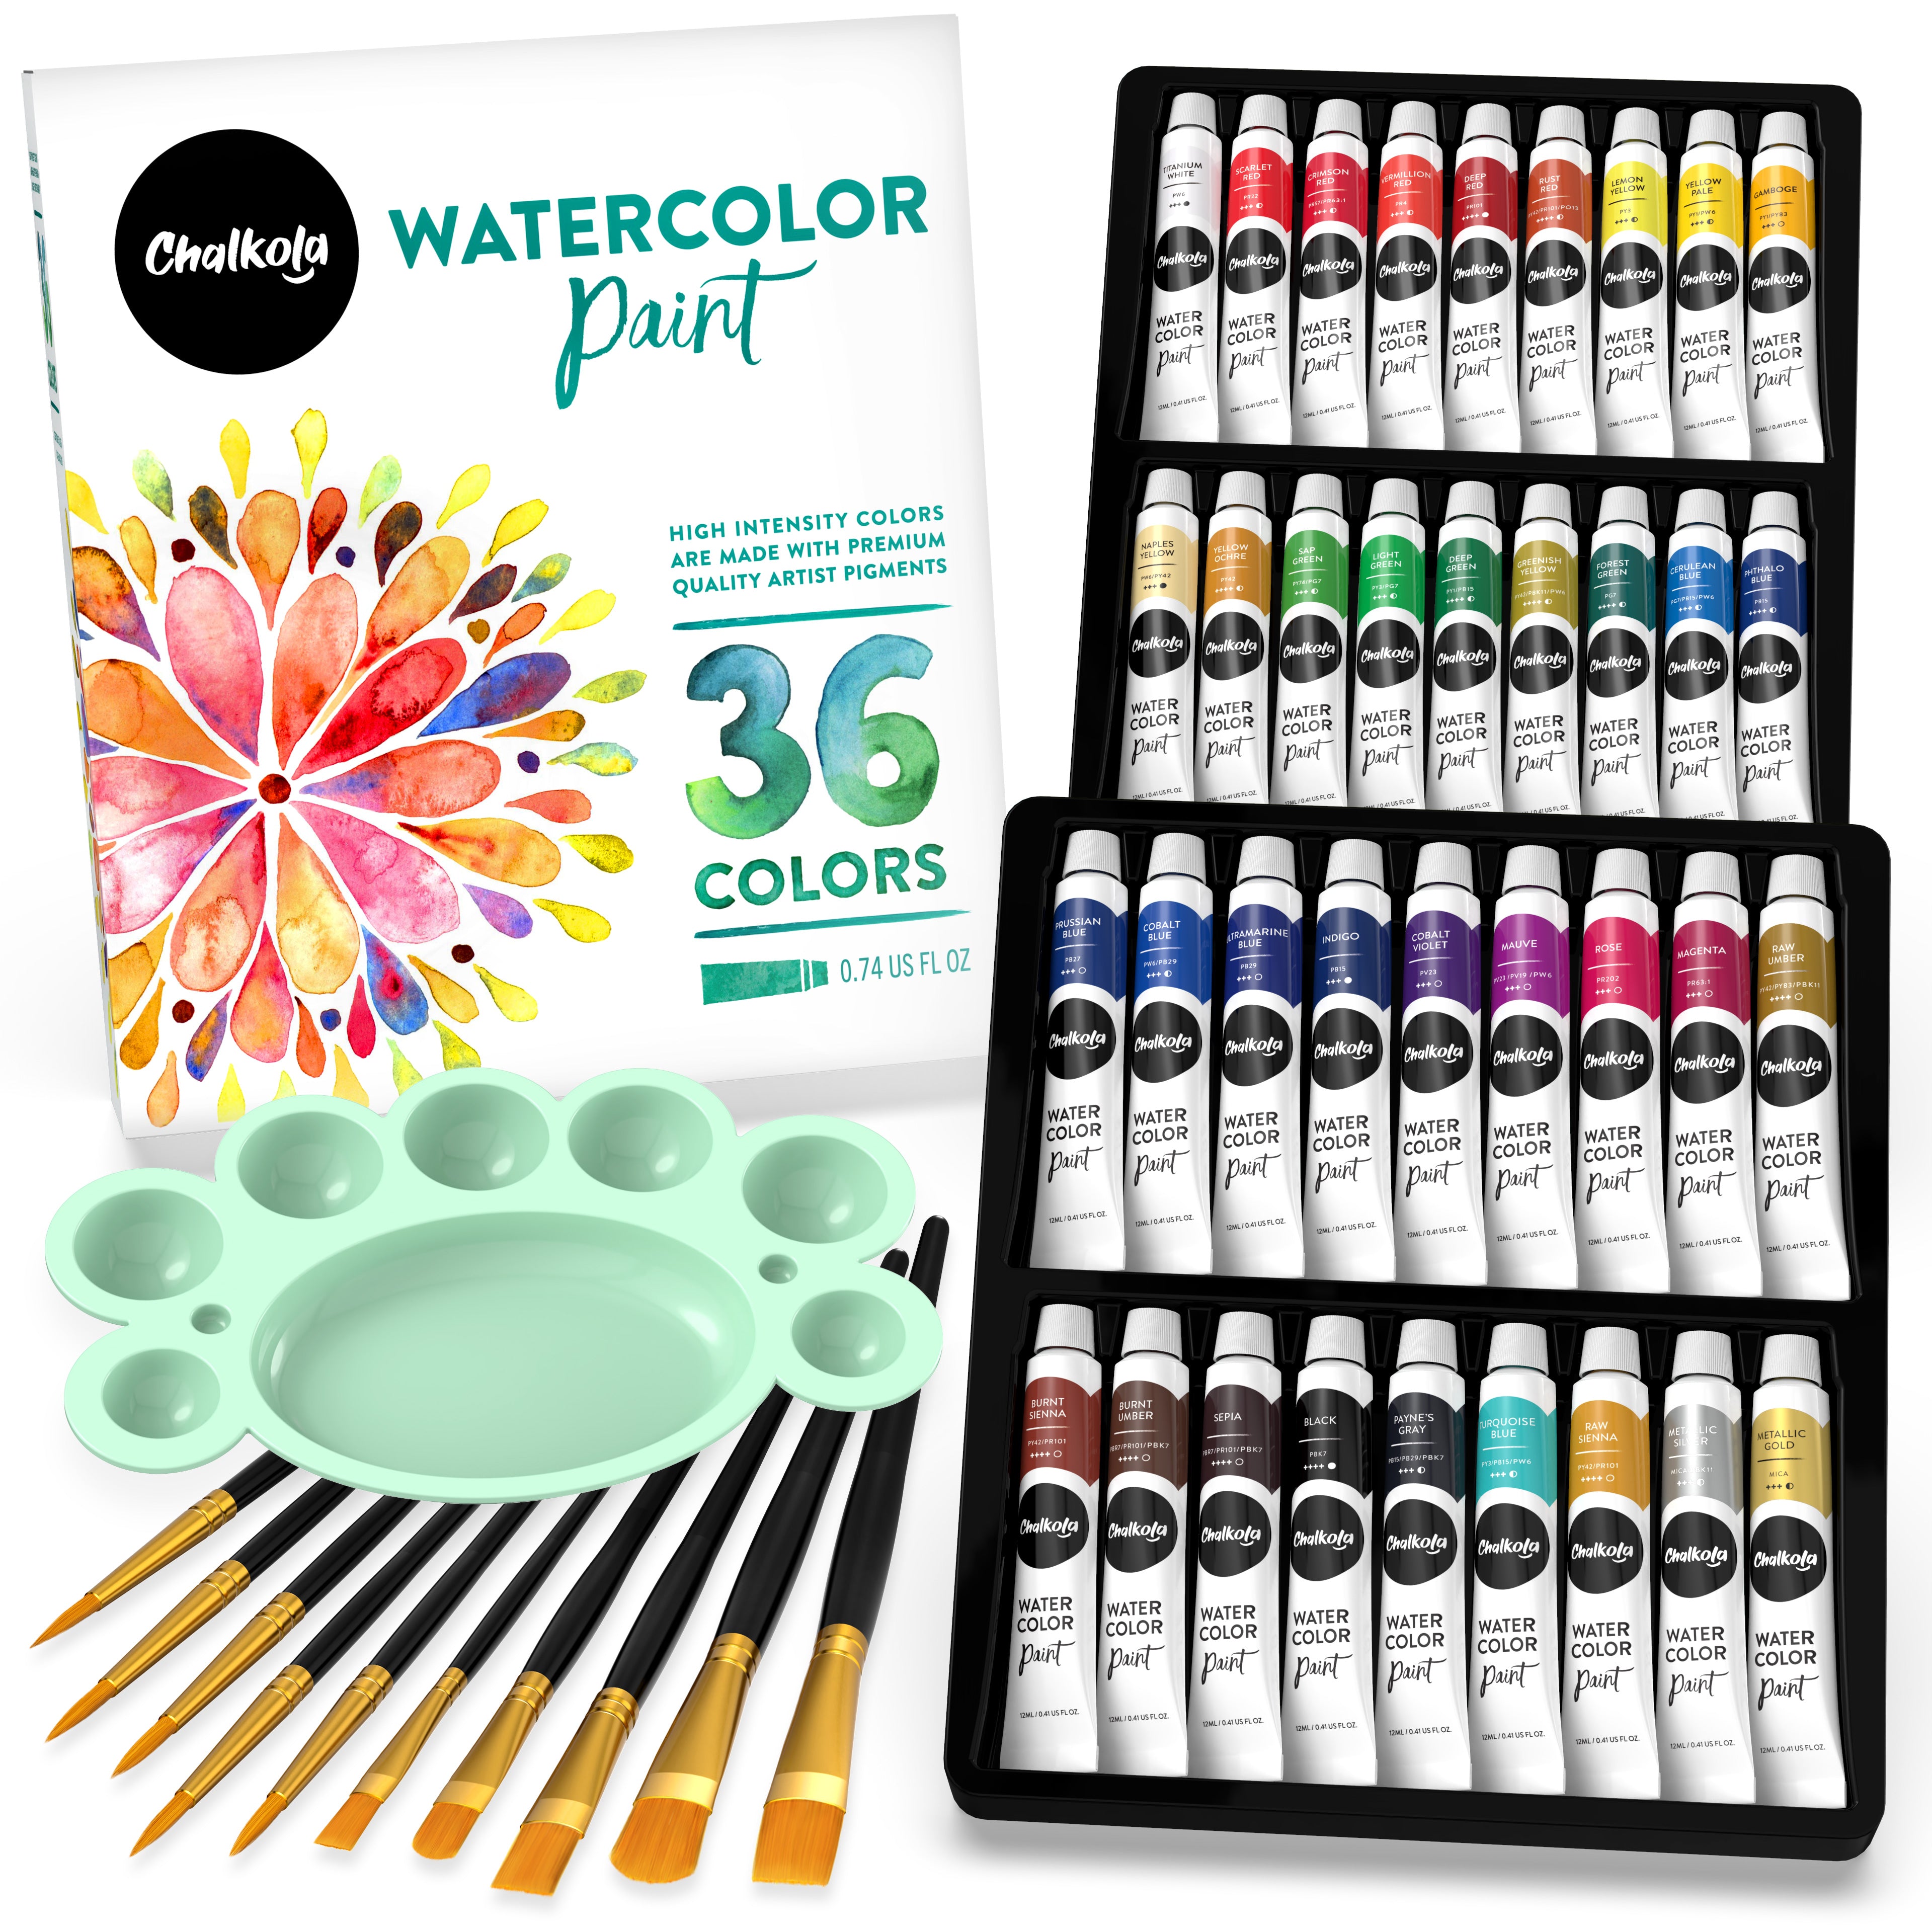  Chalkola Watercolor Brush Pens for Lettering, Coloring,  Calligraphy - Set of 28 Watercolor Pens, 15 Painting Pad & 2 Watercolor  Markers - Drawing Art Supplies for Kids, Adults, Professional Artist :  Arts, Crafts & Sewing